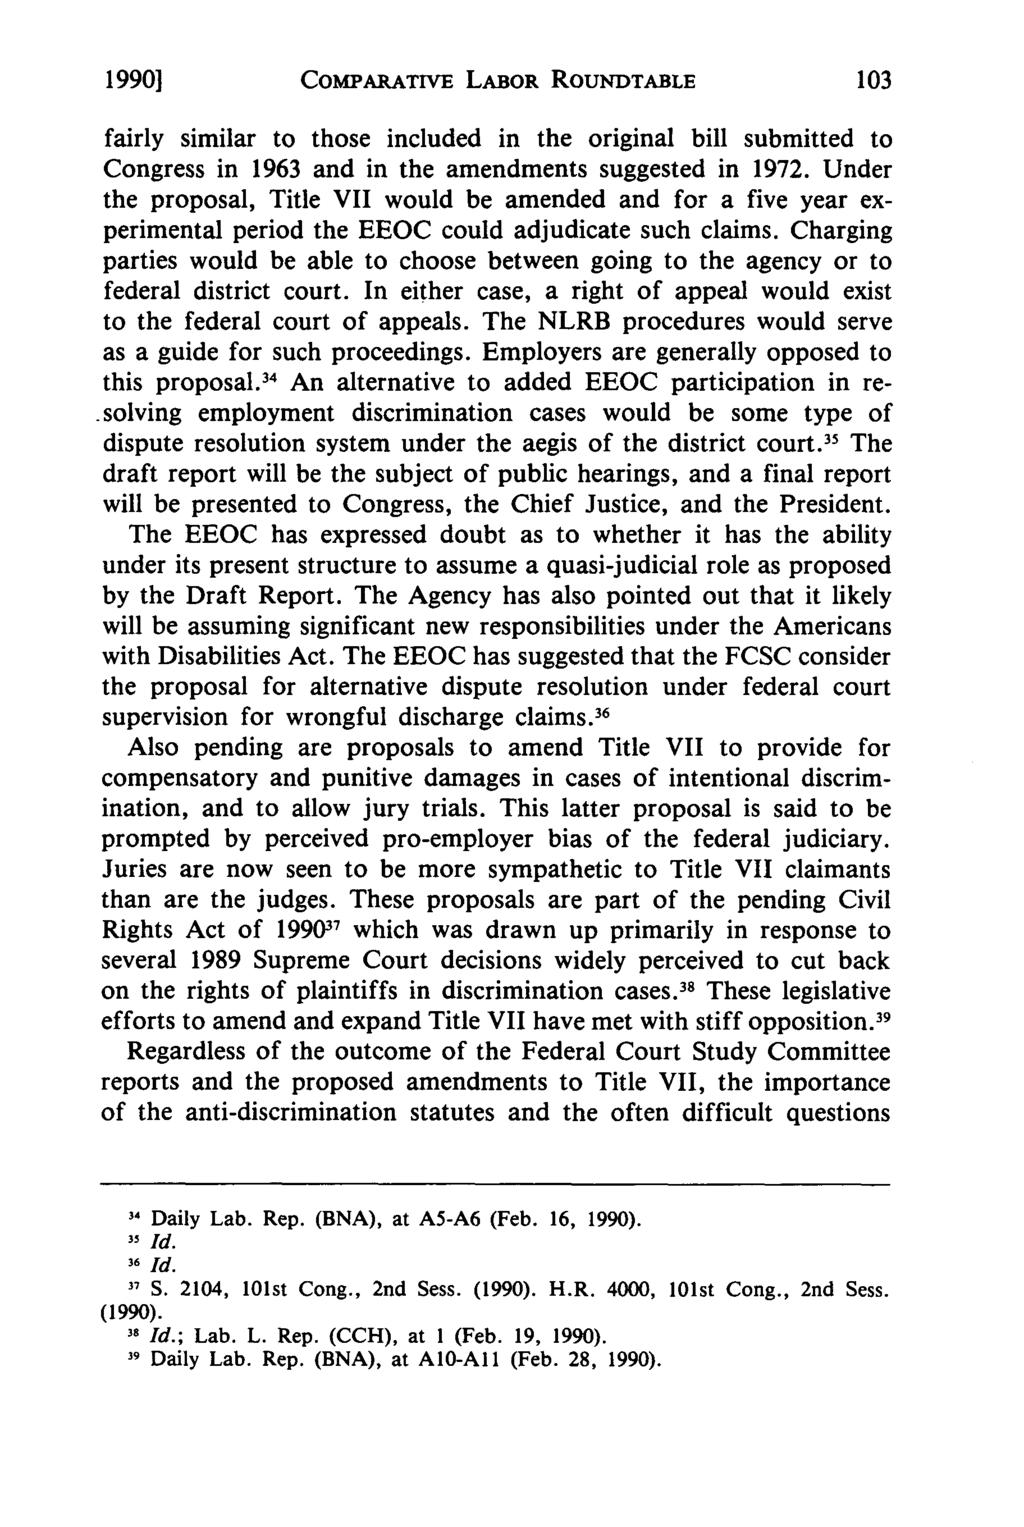 1990] COMPARATIVE LABOR ROUNDTABLE fairly similar to those included in the original bill submitted to Congress in 1963 and in the amendments suggested in 1972.